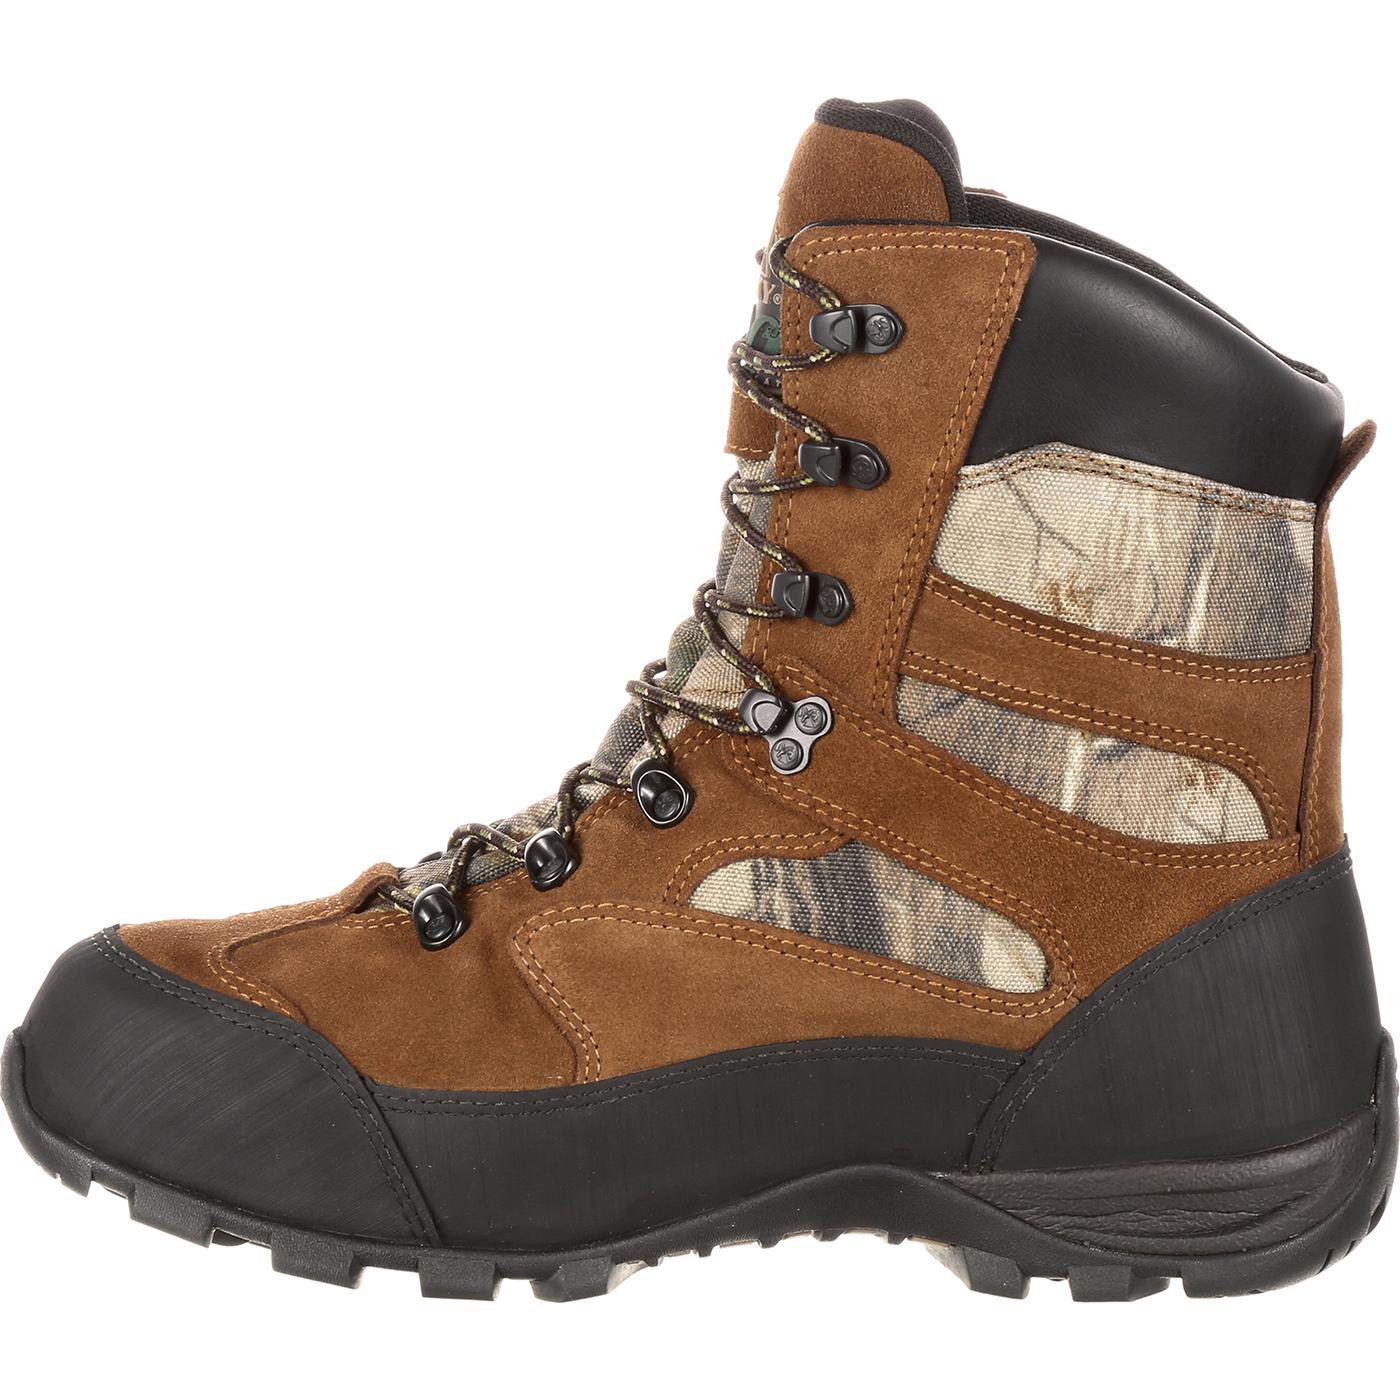 Rocky Boots: GORE-TEX Waterproof Insulated Outdoor Boot